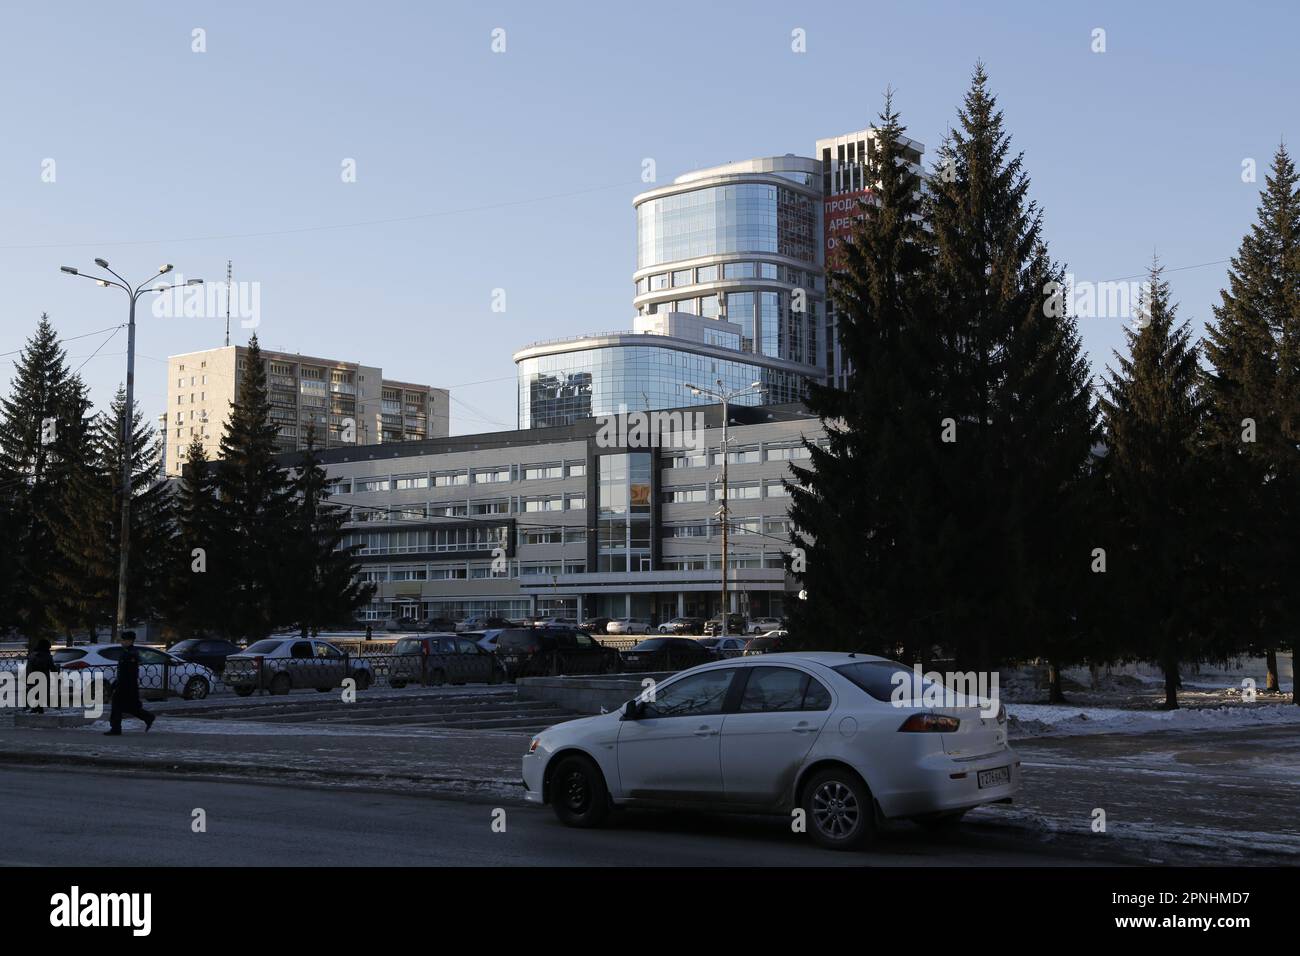 Shiny building in the centre of Yekaterinburg, Ural, Russia housing some offices e.g. Ministry of State Property Management of the Sverdlovsk region Stock Photo